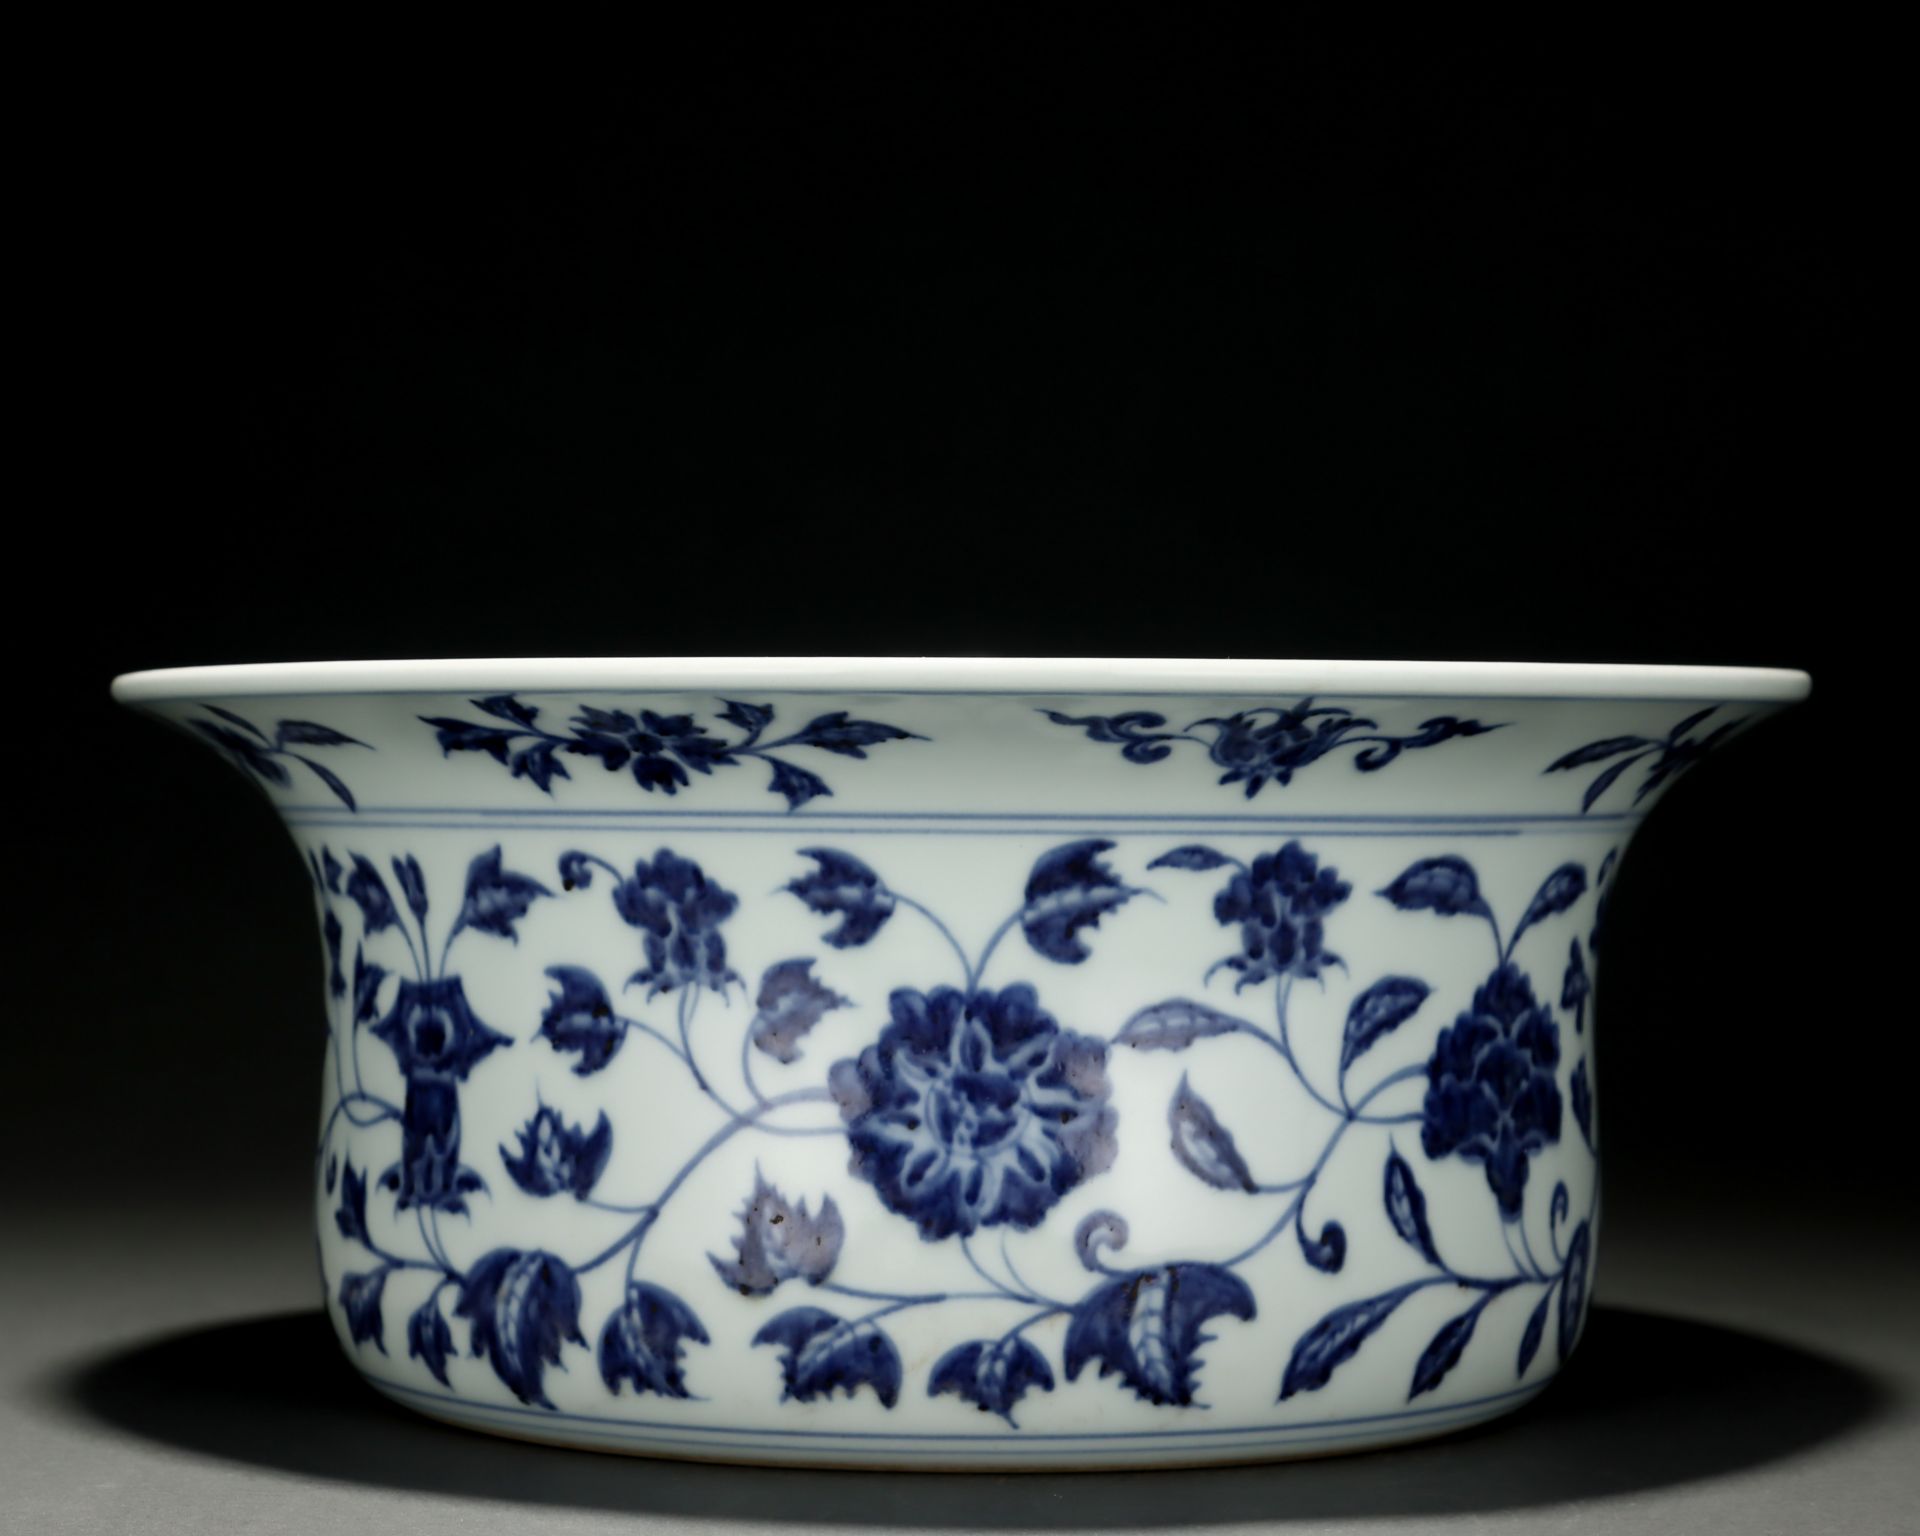 A Chinese Blue and White Floral Scrolls Basin